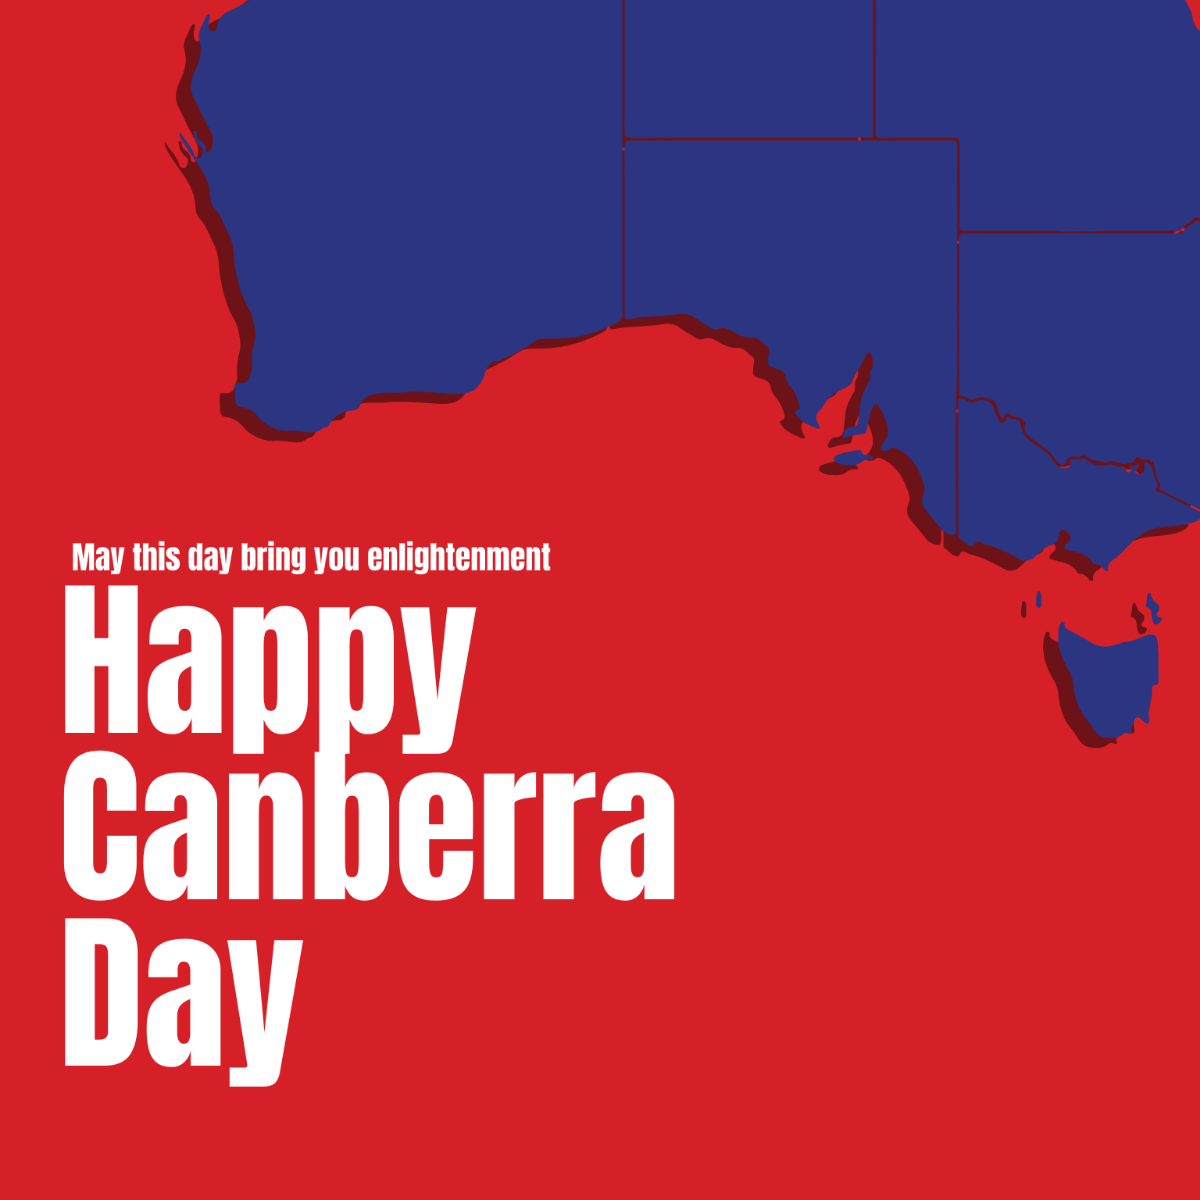 Canberra Day Greeting Card Vector Template